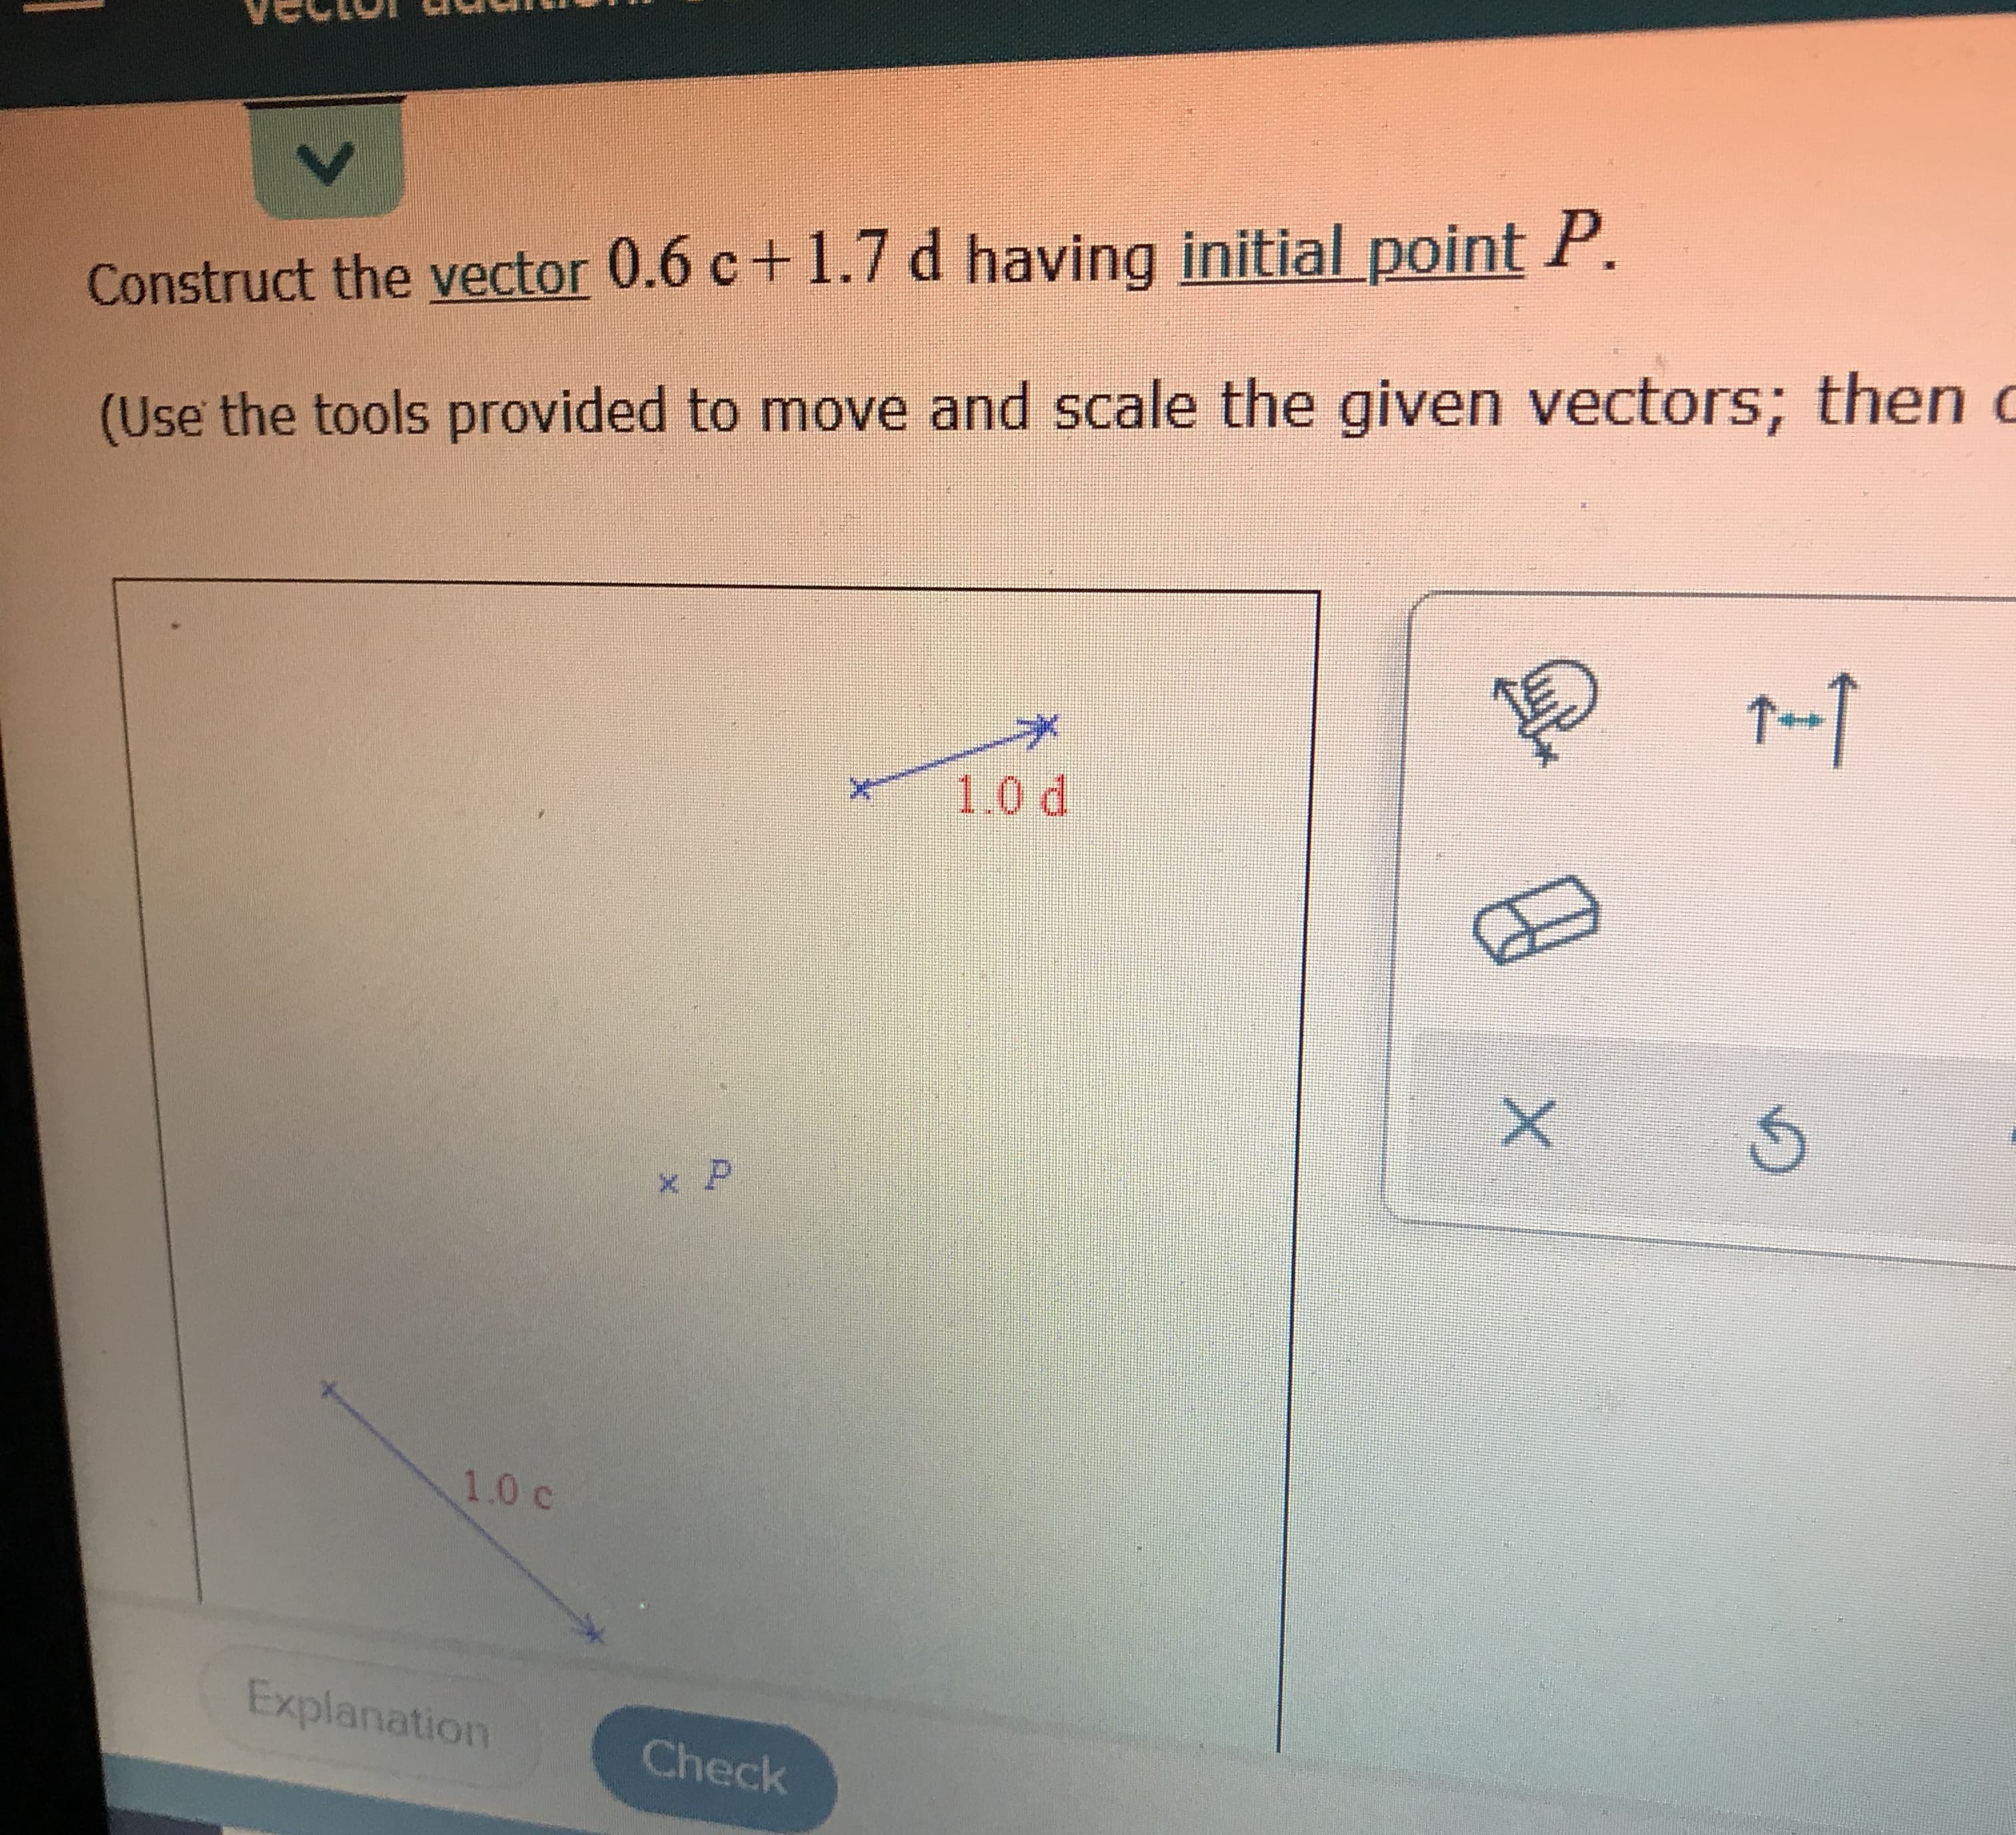 Construct the vector 0.6 c+1.7 d having initial point P.
(Use the tools provided to move and scale the given vectors: th
